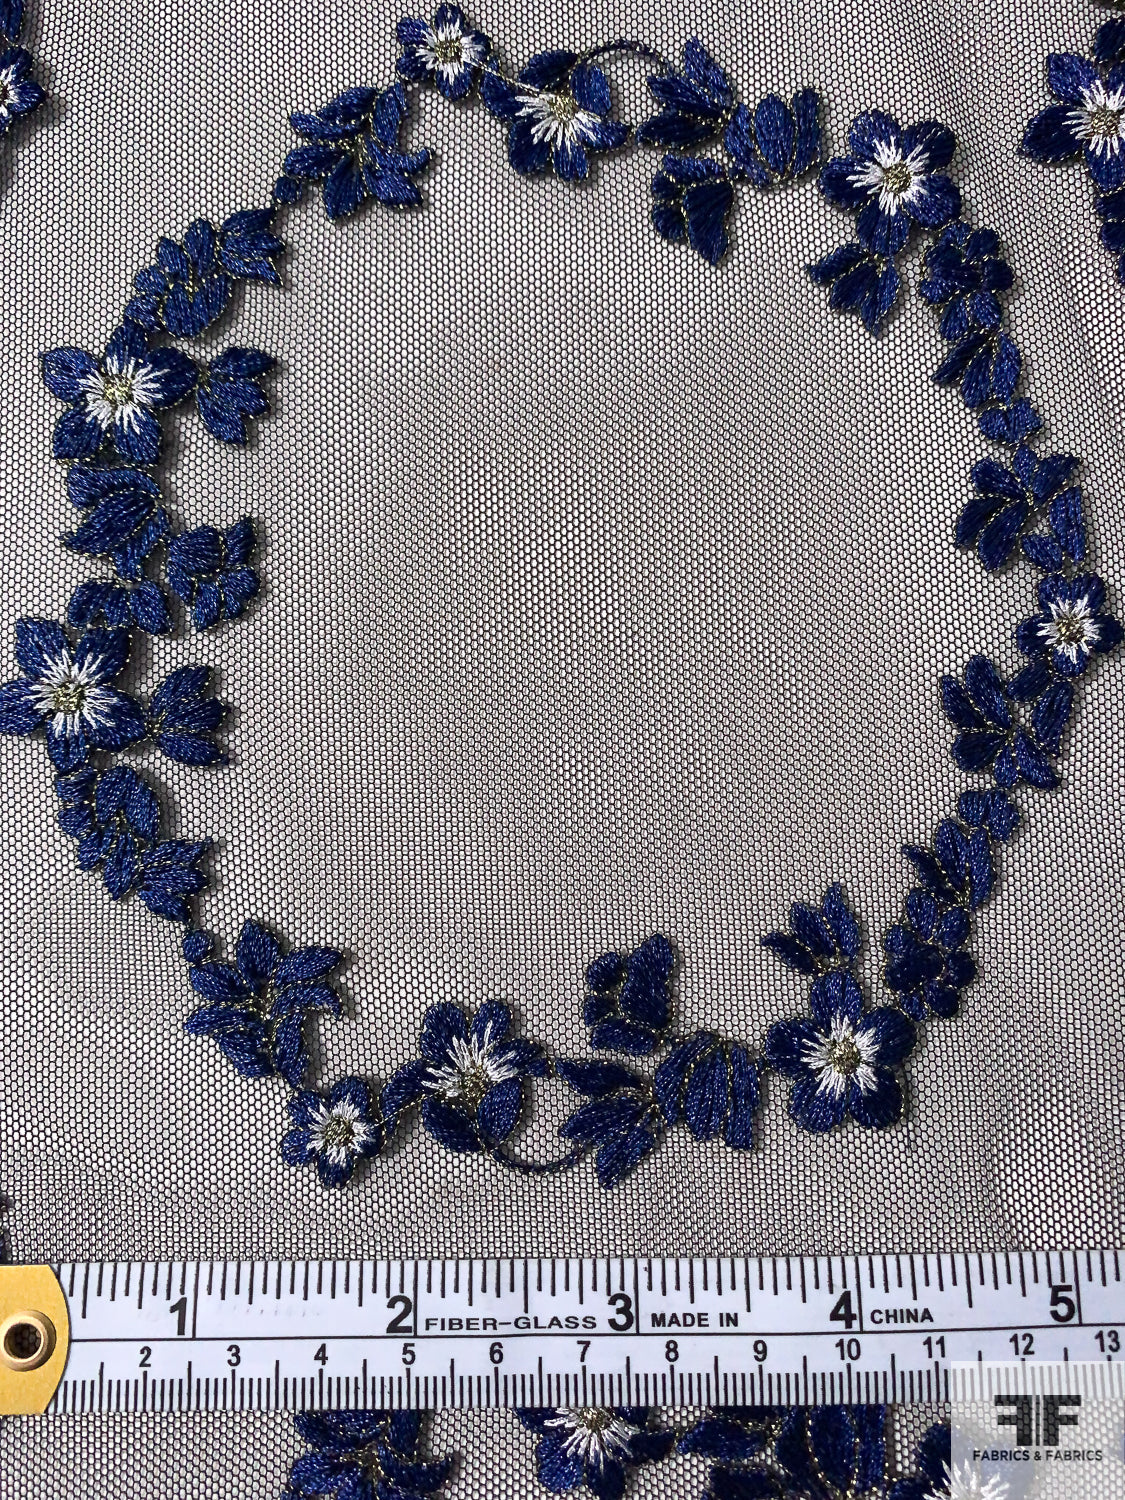 Floral Circle Design Fine Embroidered Netting with Lurex Detailing - Black / Royal Blue / White / Gold